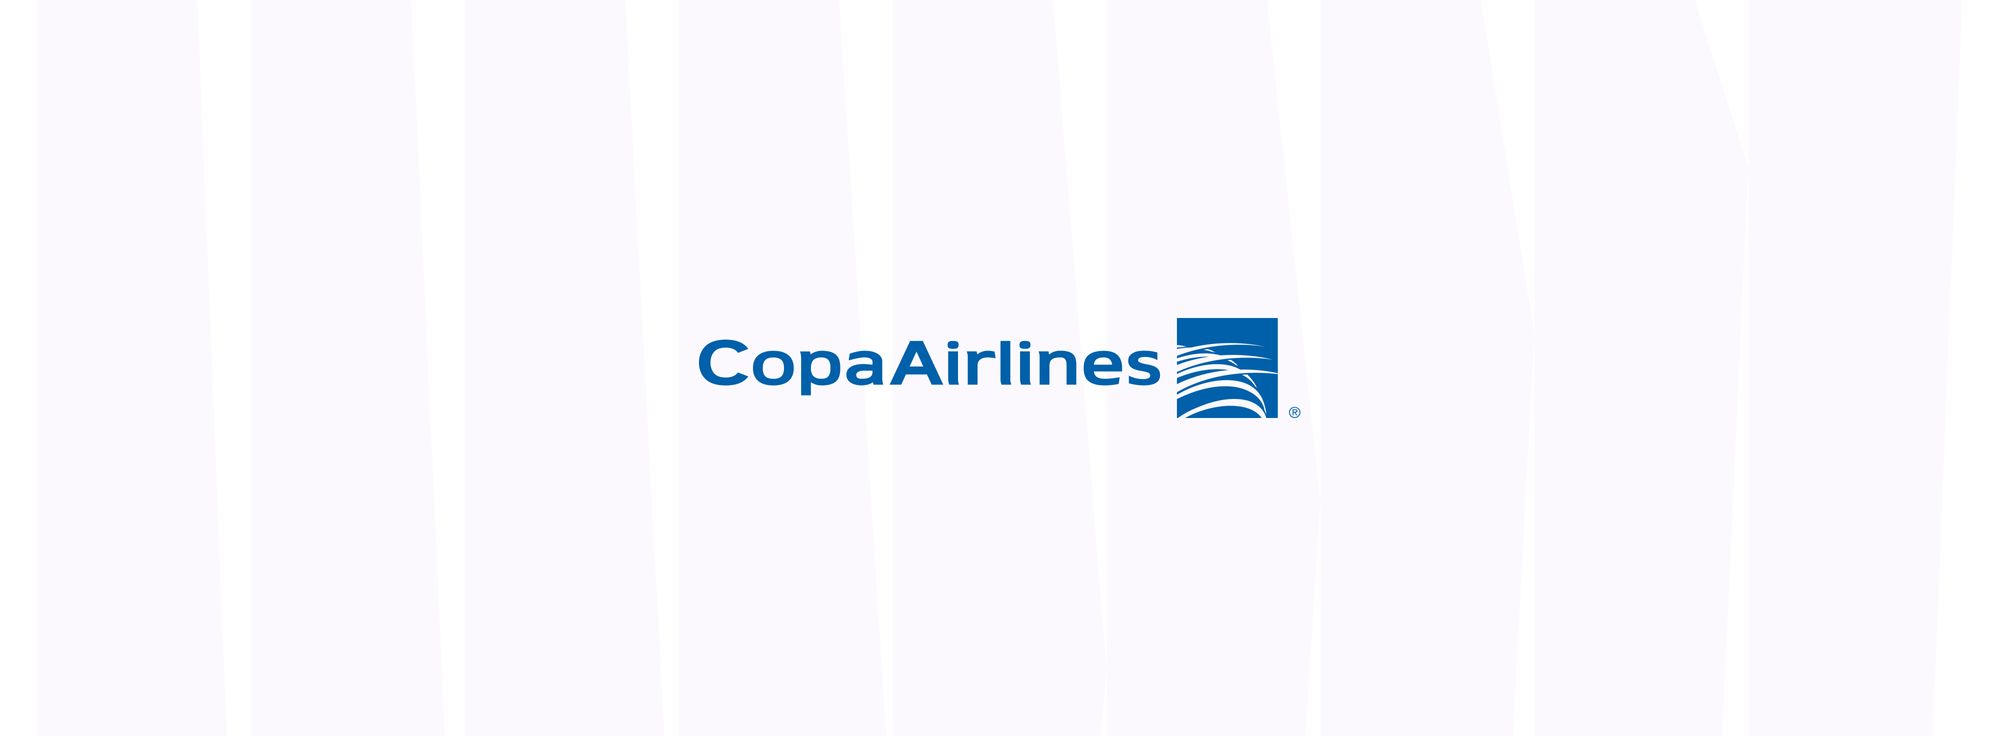 Duffel First Aggregator To Go Live With Copa Airlines